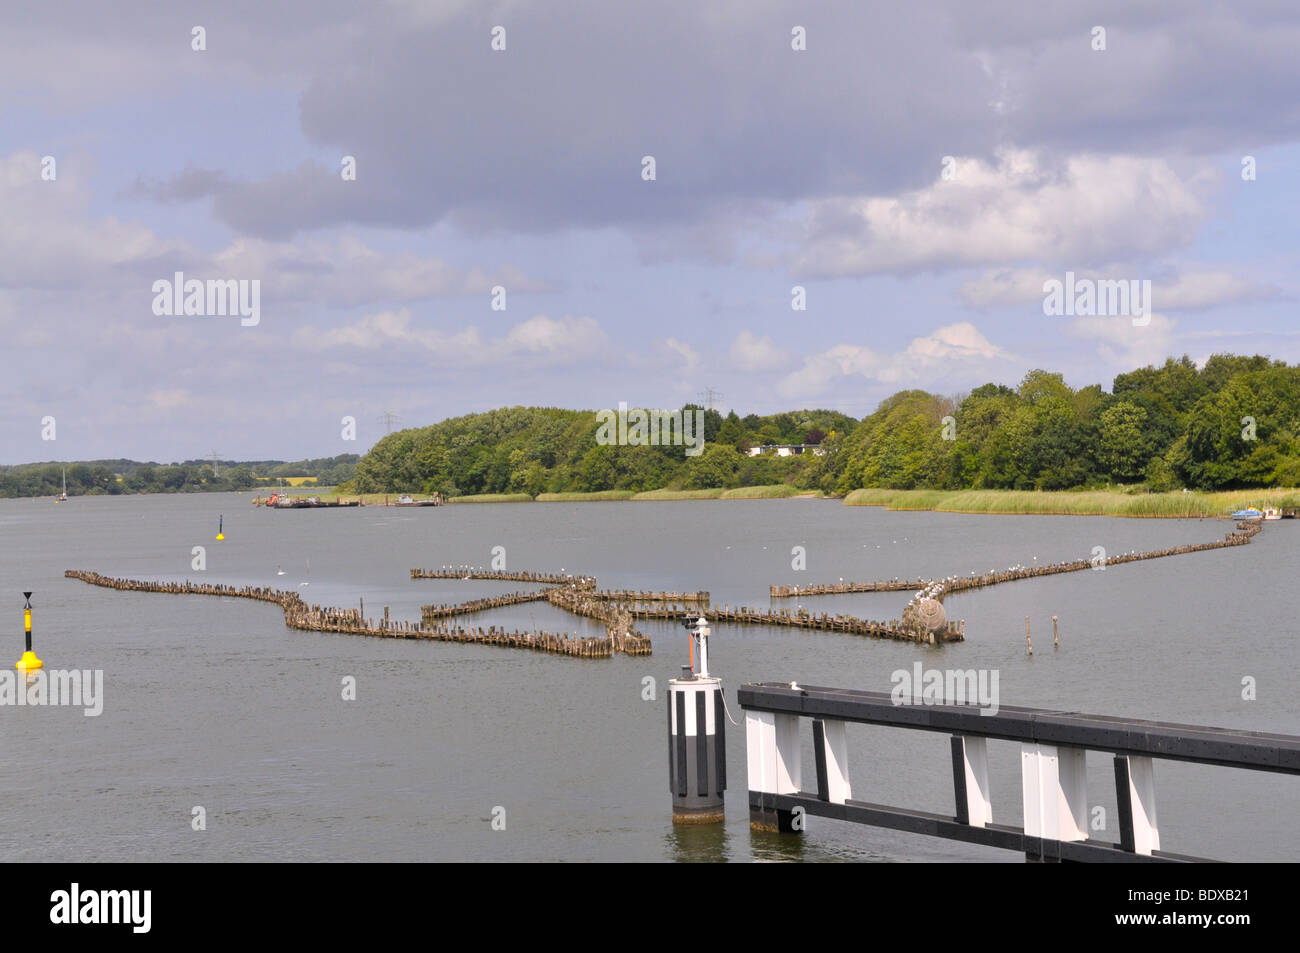 Herring fences in Kappeln on the Schlei river, Schleswig-Holstein, northern Germany, Germany, Europe Stock Photo